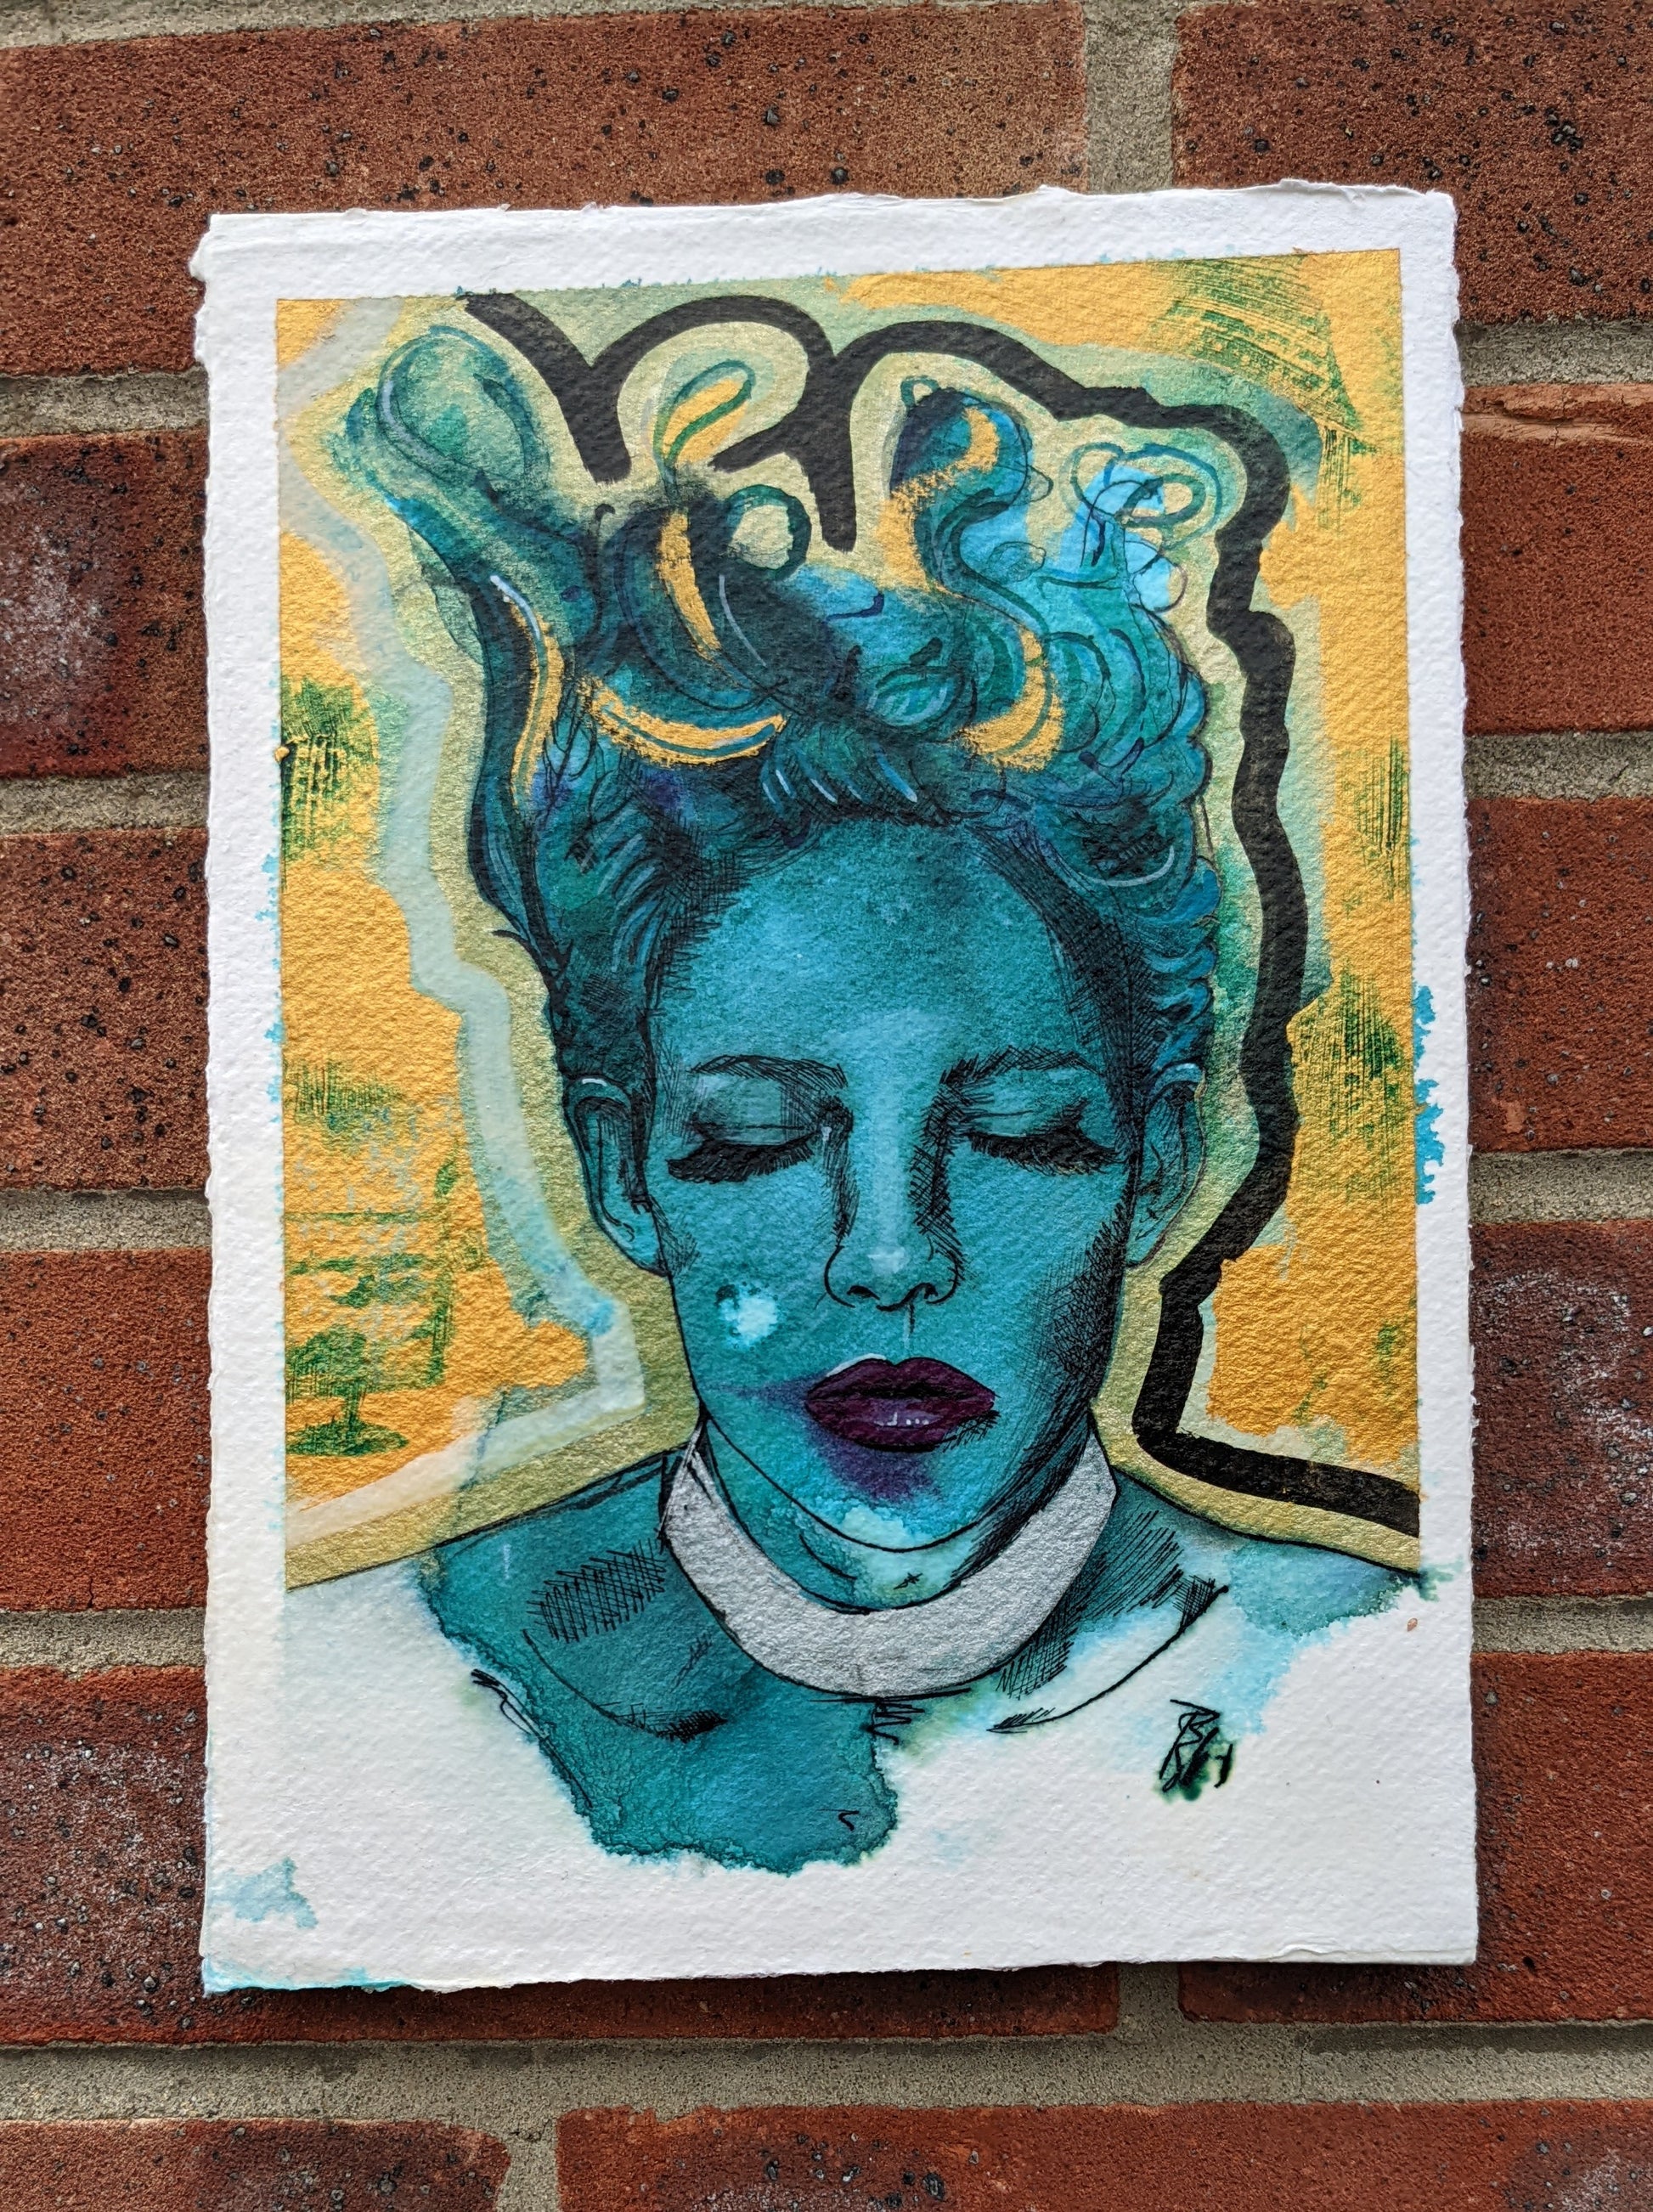 Aphrodite, an original ink and acrylic painting by Middlesbrough artist Dianne Bowell, the british female artist living in Teesside, Teesvalley, this painting of the greek goddess in teal and gold, an affordable original painting